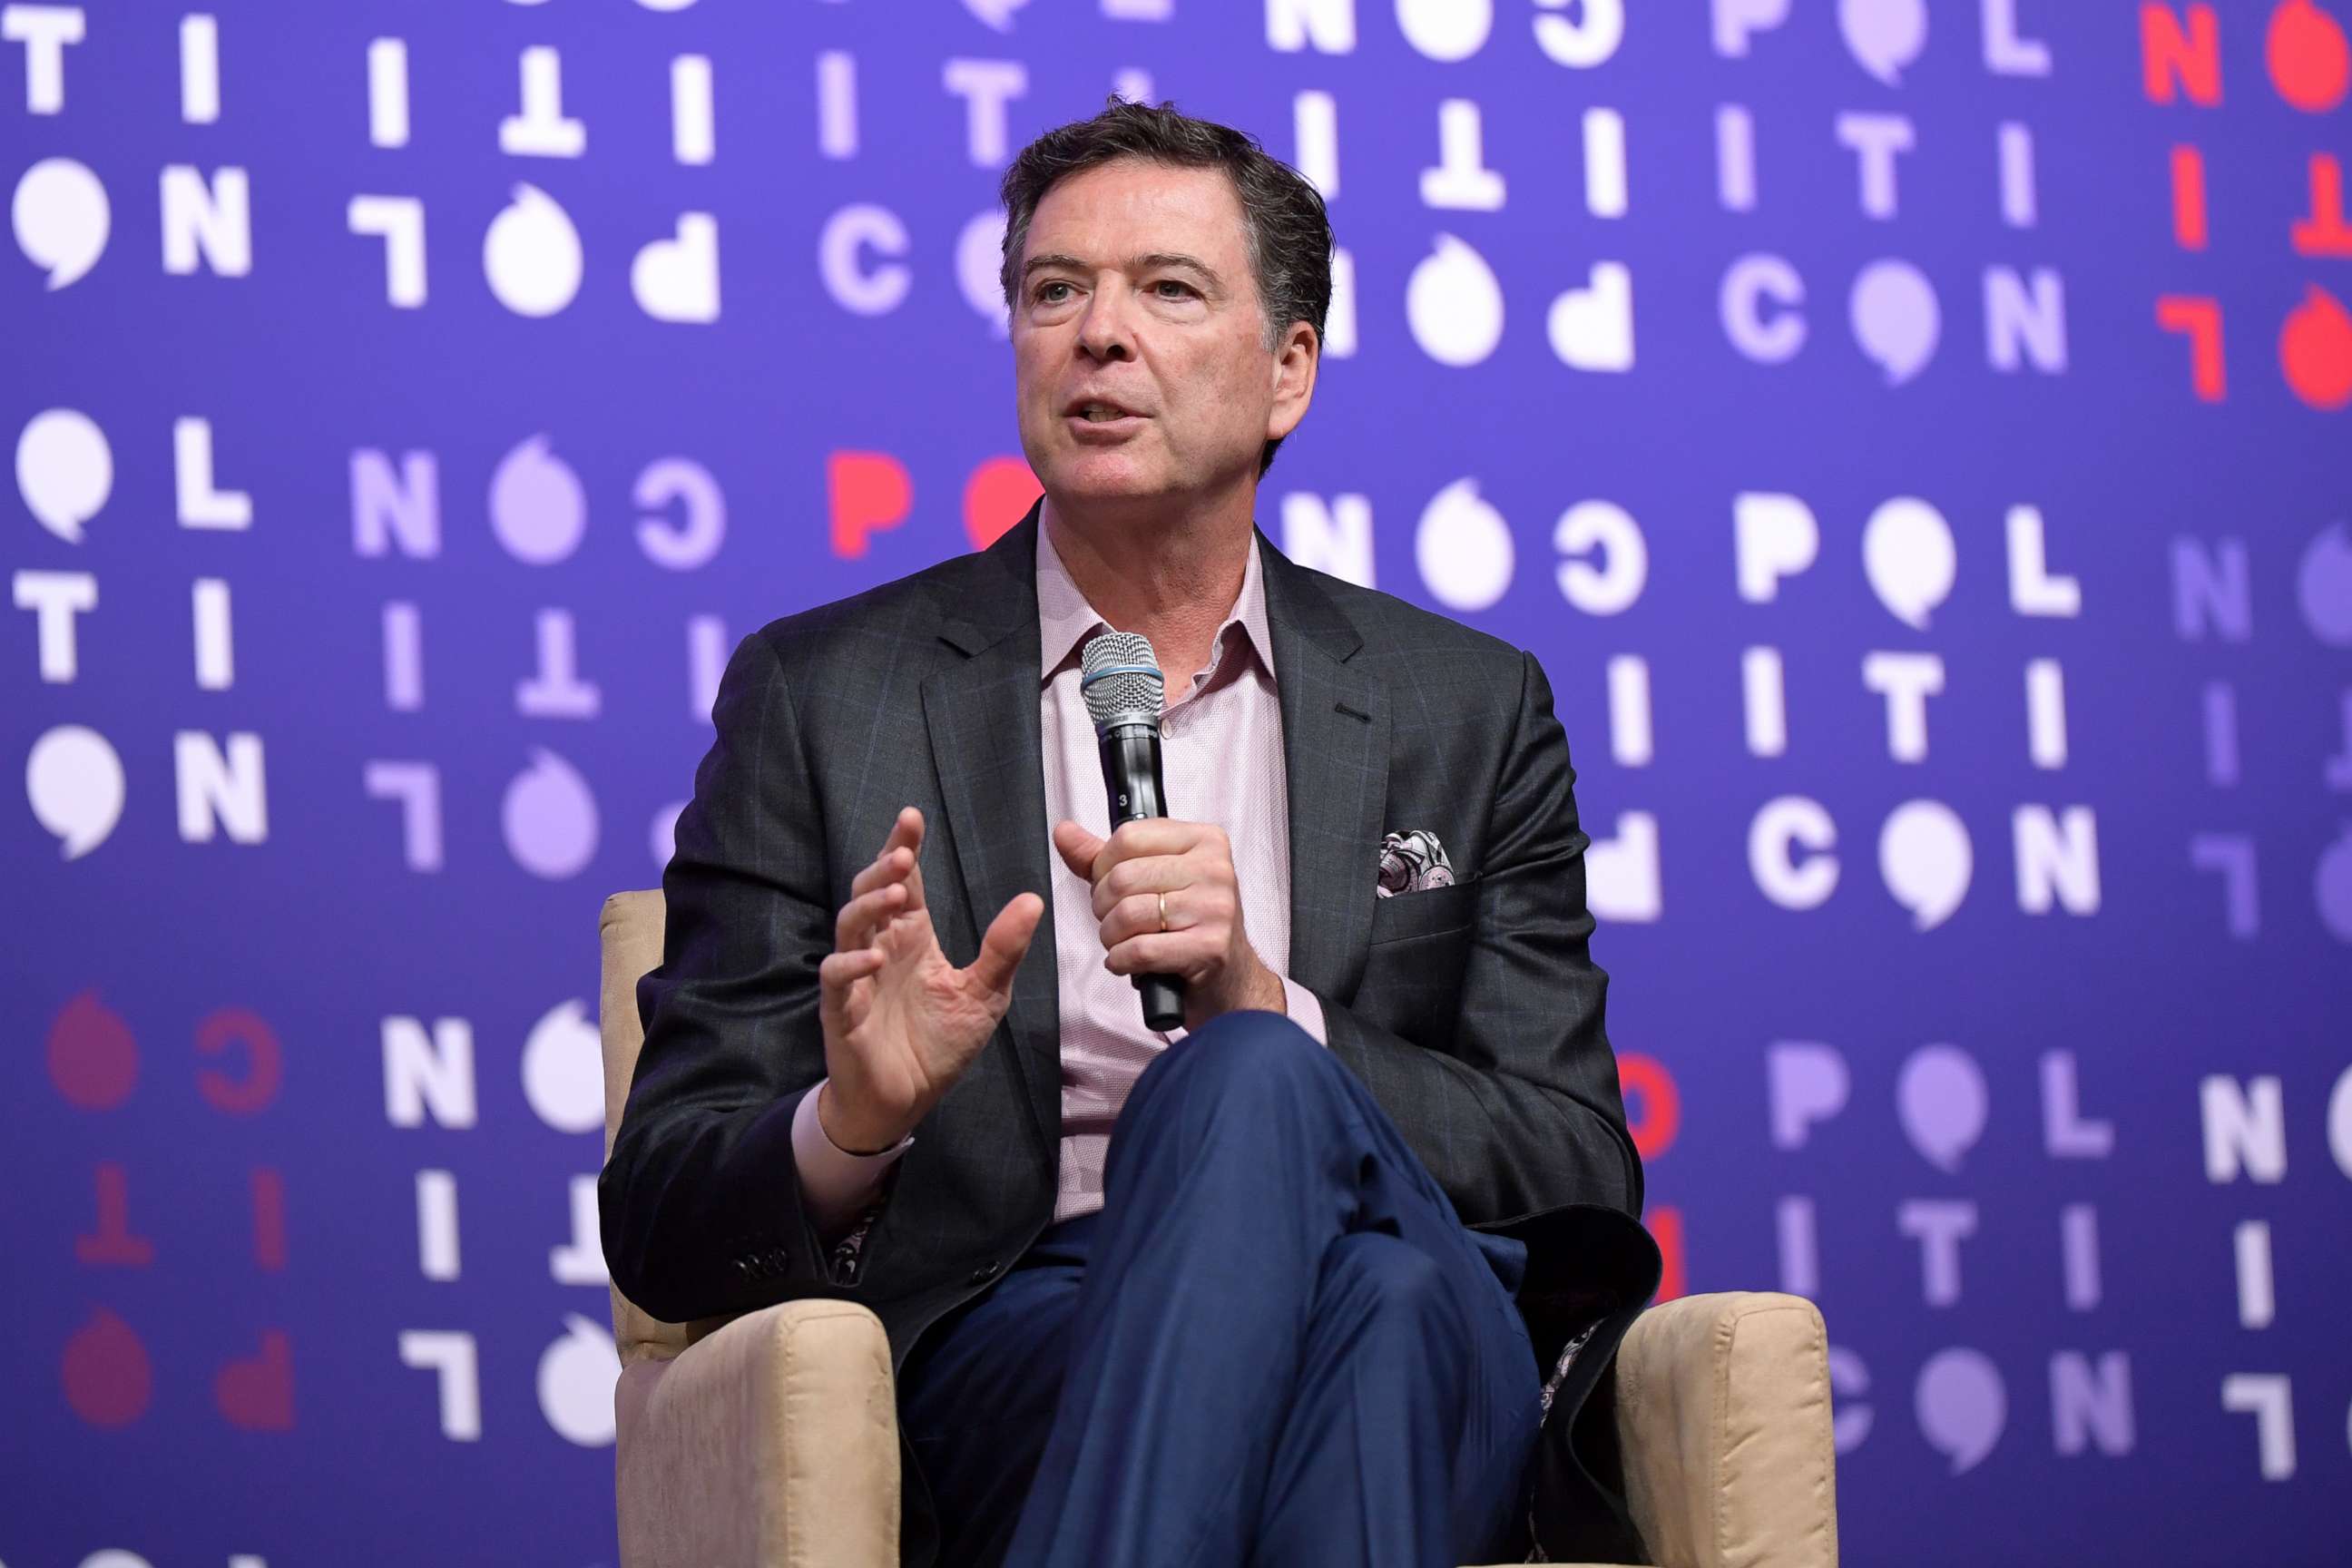 PHOTO: James Comey speaks onstage during the 2019 Politicon at Music City Center on Oct. 26, 2019, in Nashville, Tennessee.